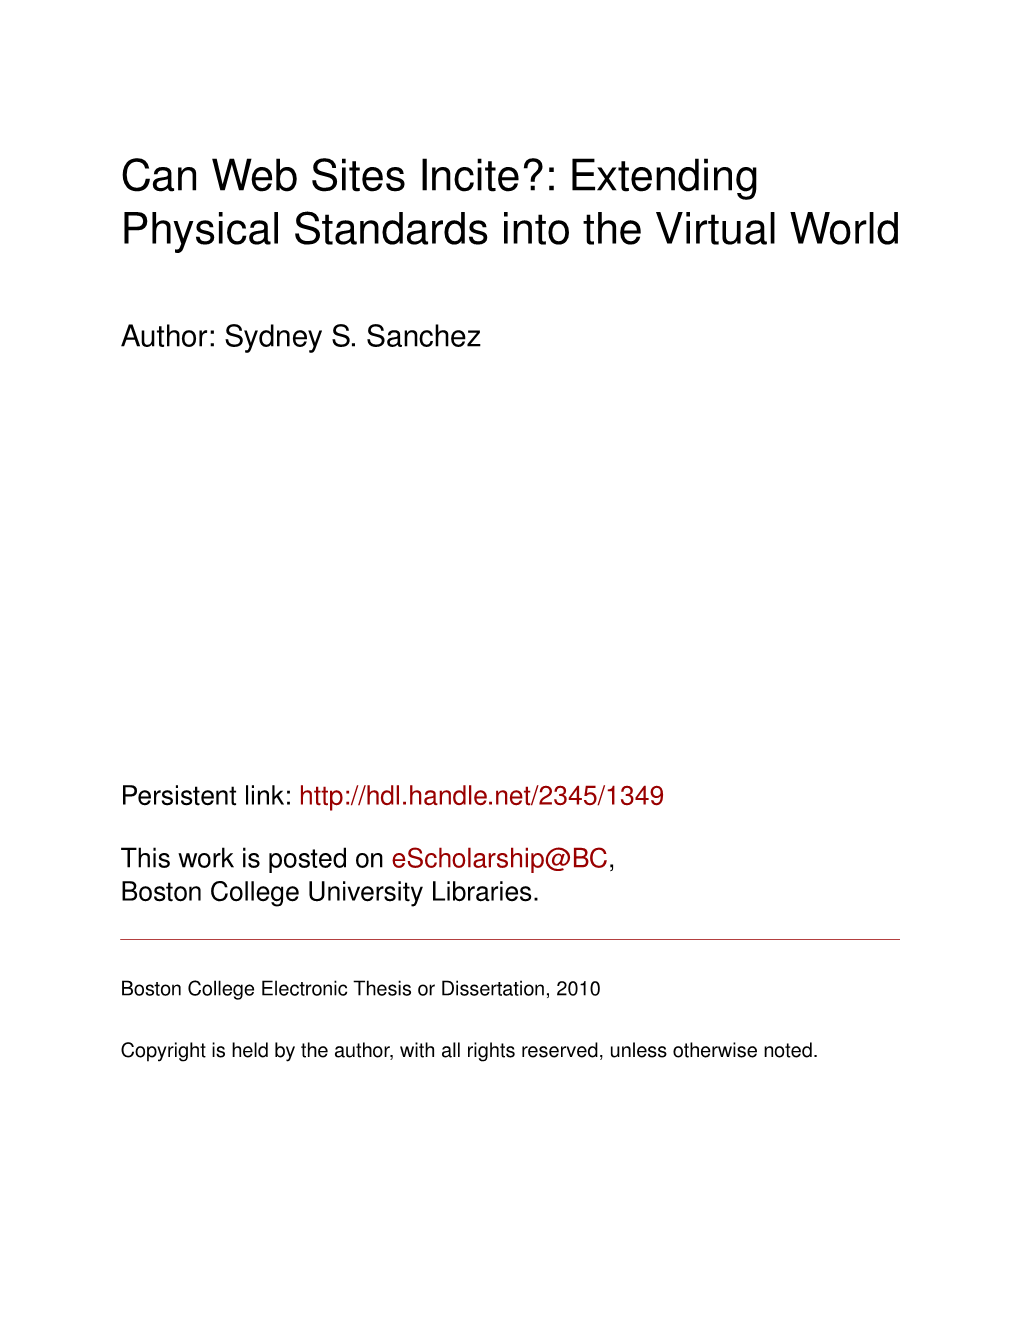 Can Web Sites Incite?: Extending Physical Standards Into the Virtual World